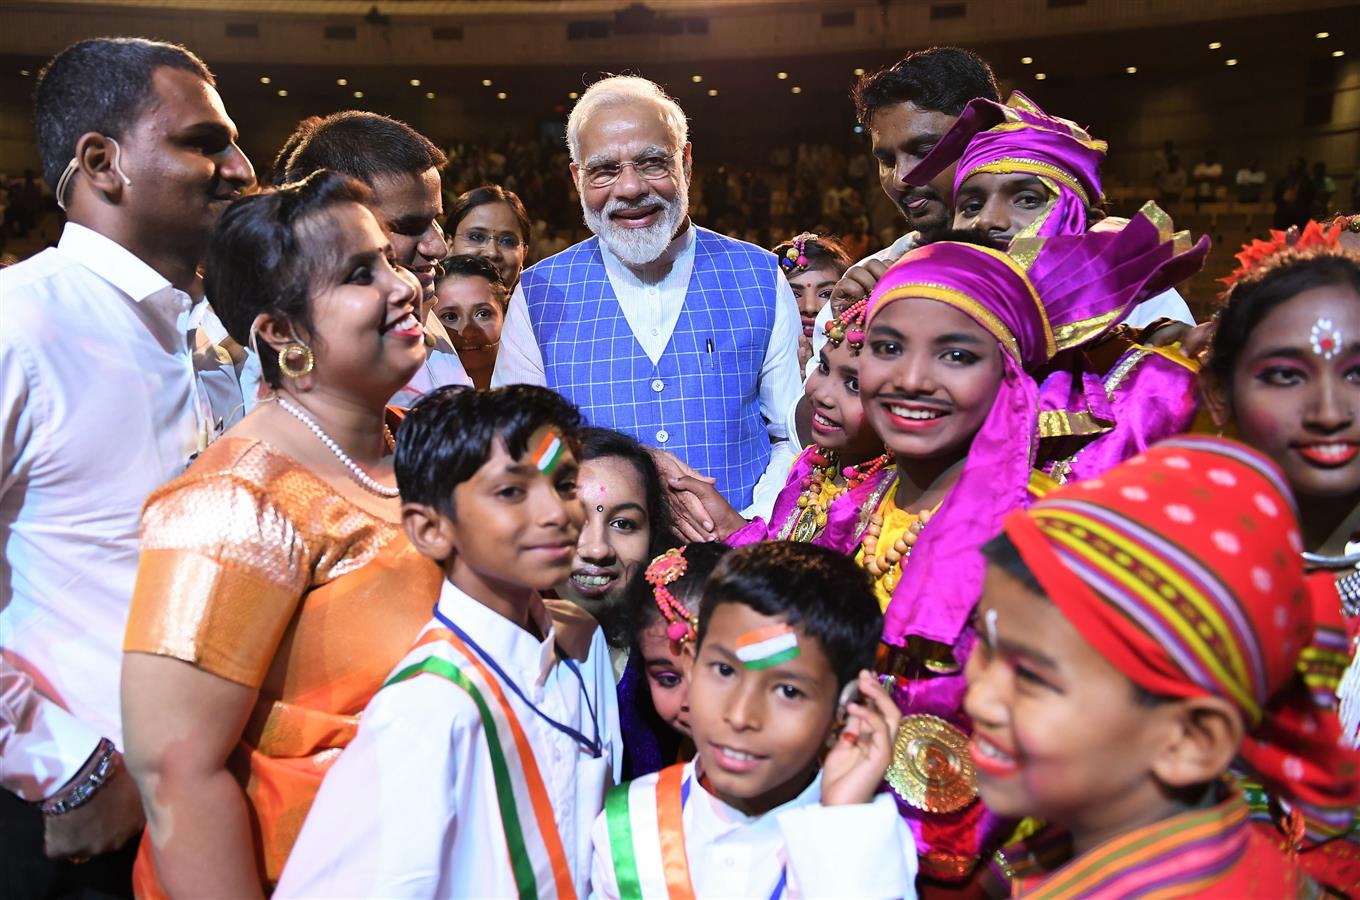 The Prime Minister, Shri Narendra Modi at the Cultural Event “Divya Kala Shakti : Witnessing Ability in Disability”, organised by the DEPwD, Ministry of Social Justice & Empowerment, in New Delhi on July 23, 2019.